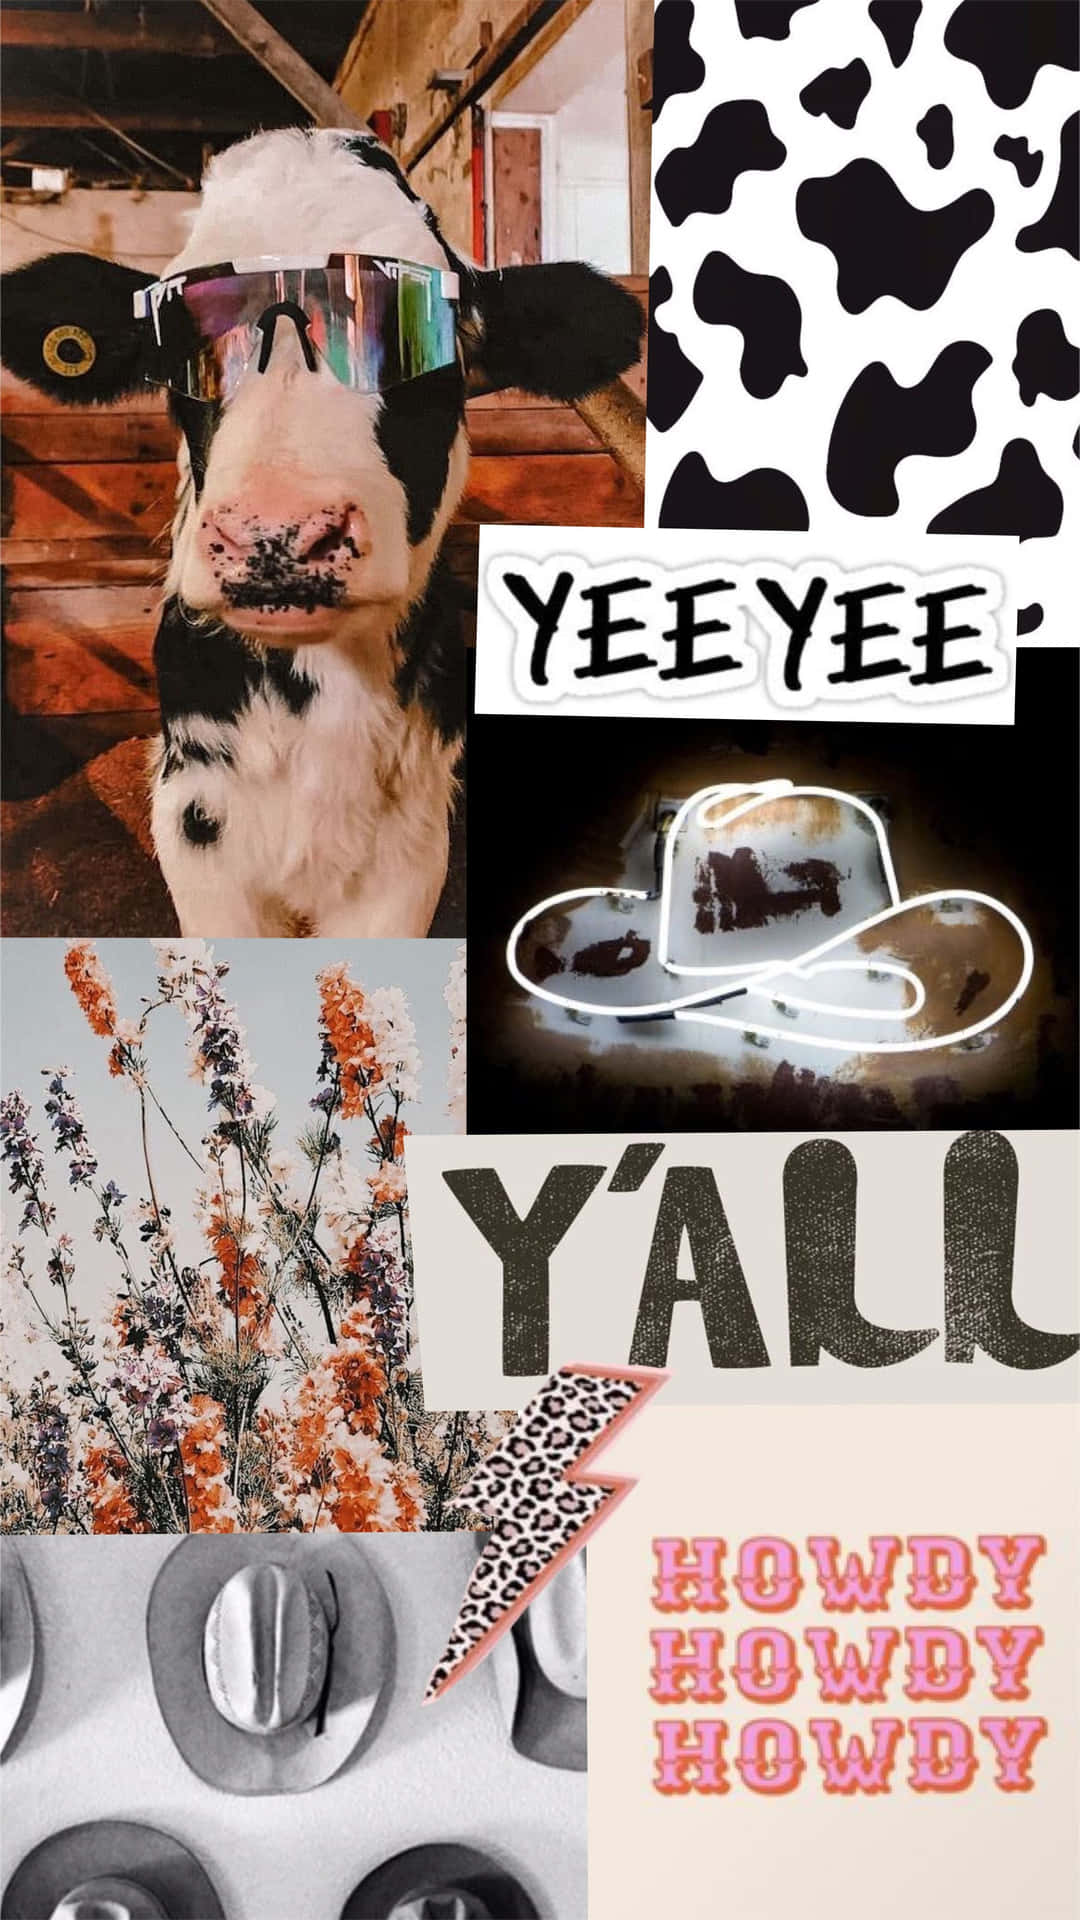 A Collage Of Cows, Cowboys, And Cows